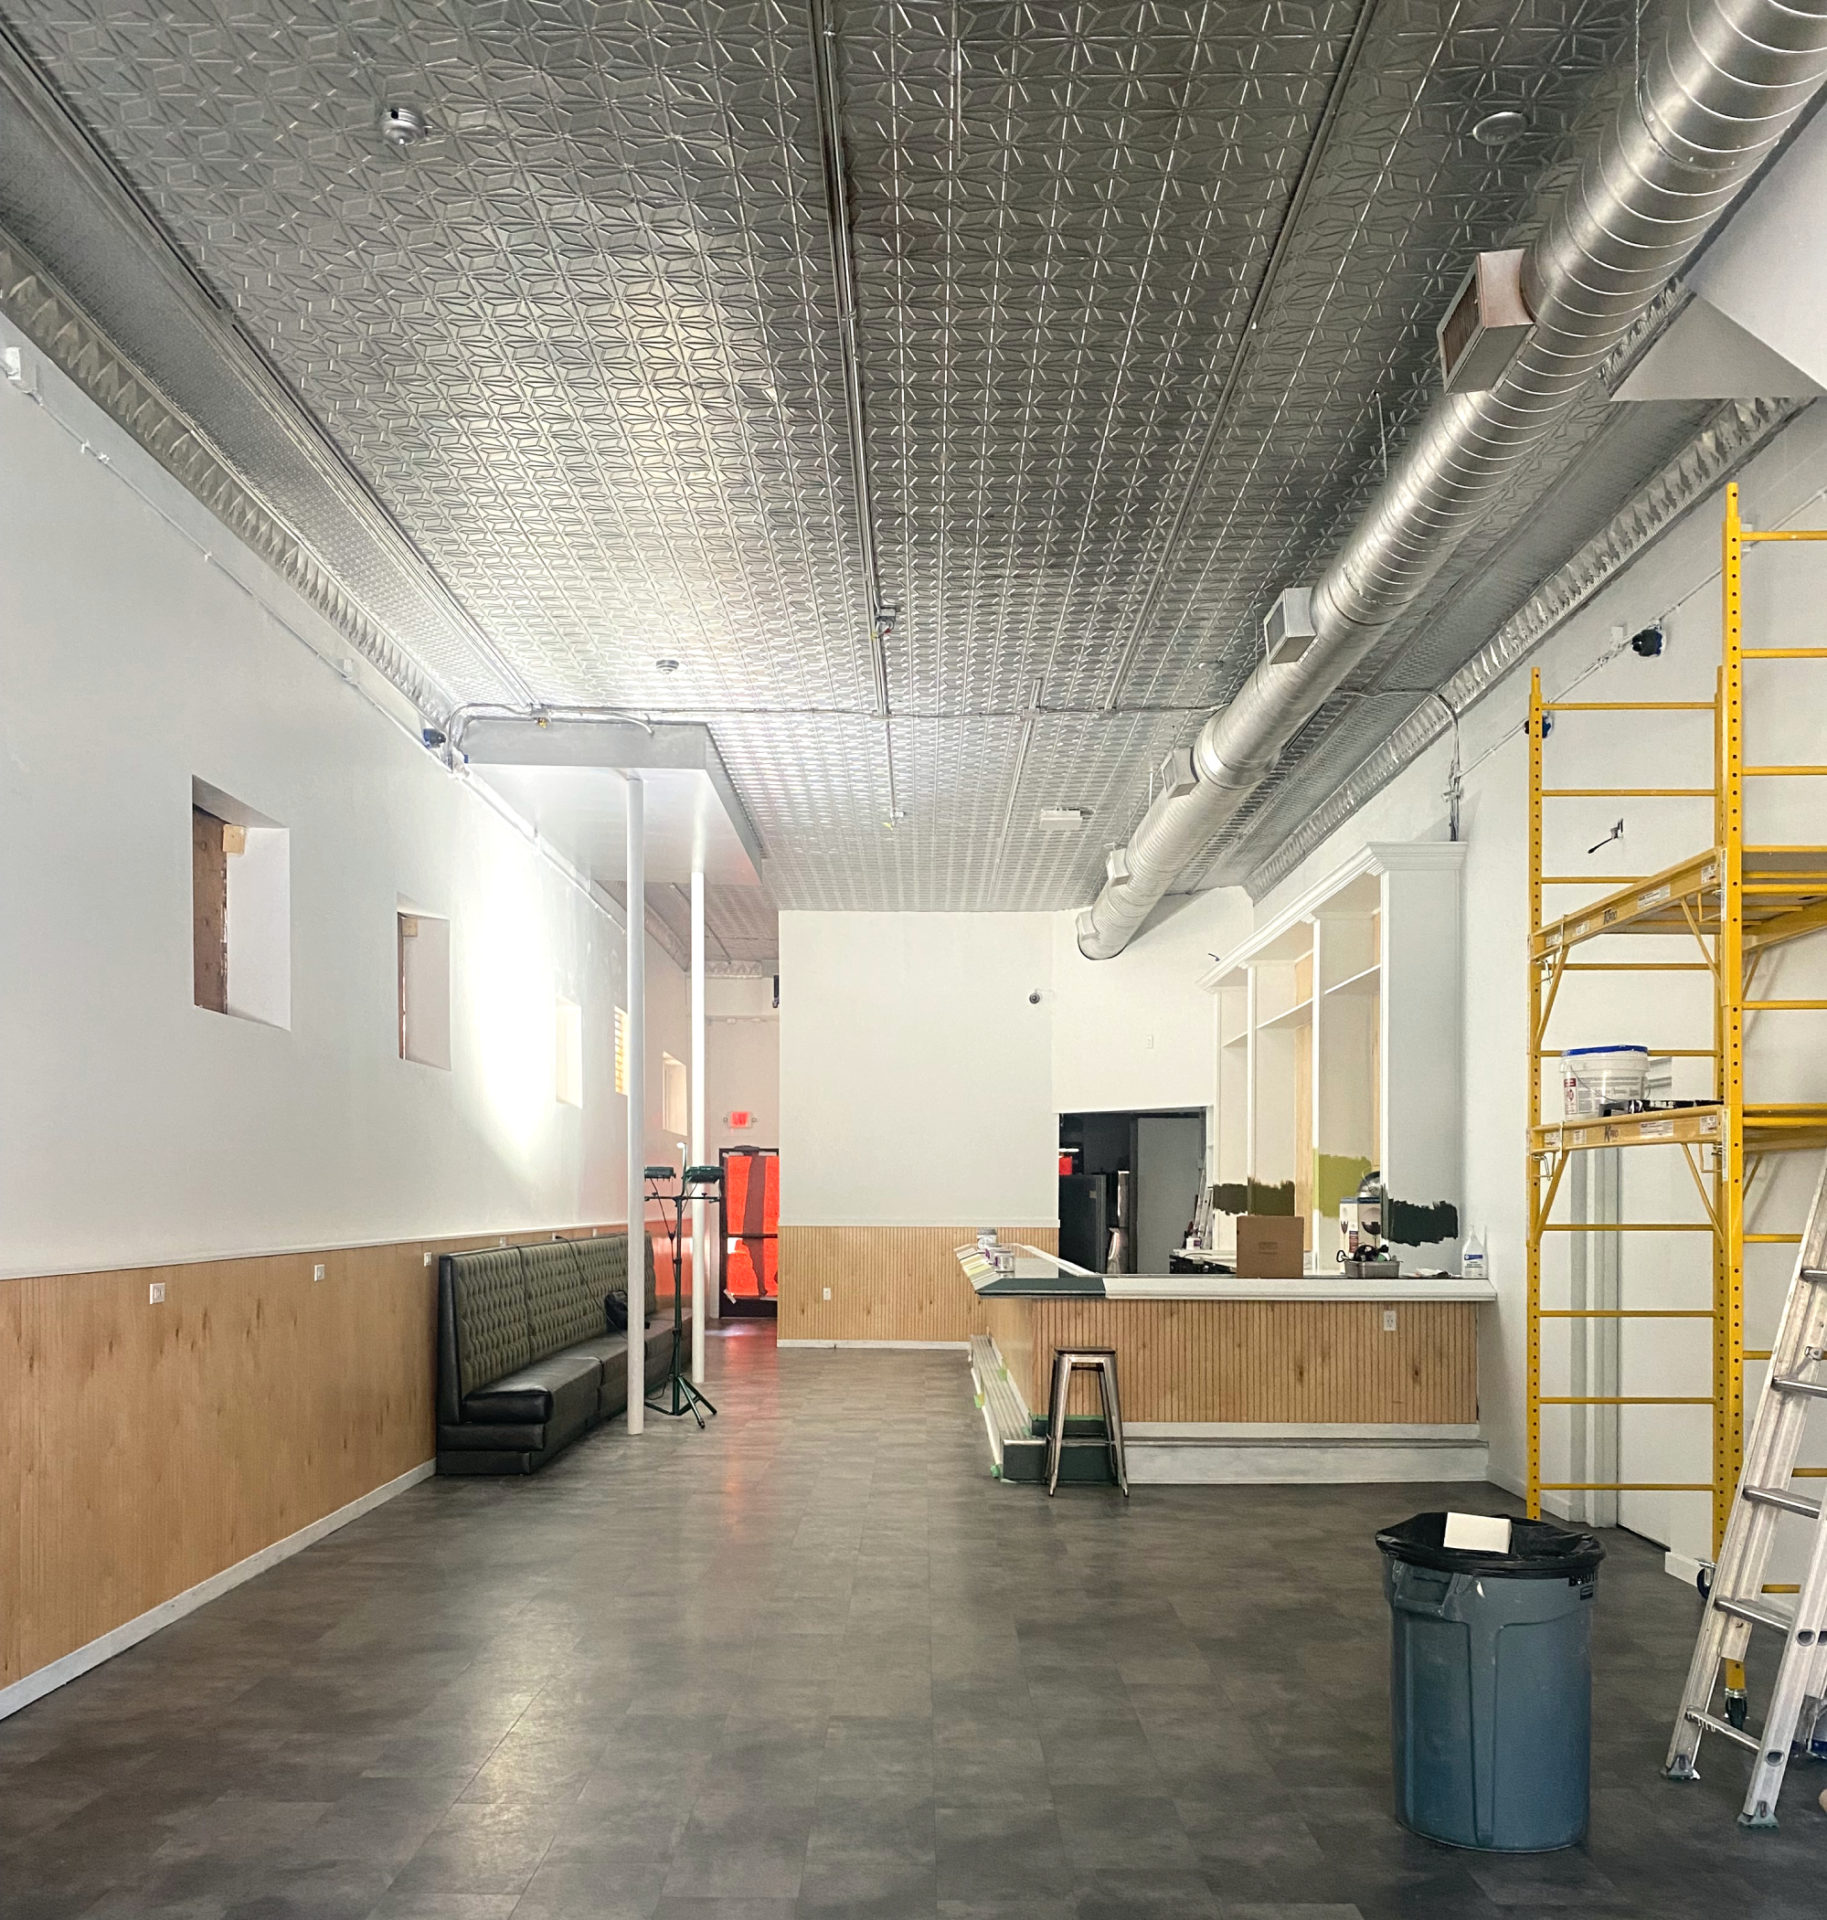 Interior of Gallery, an art bar in Urbana, under construction. The walls are white with light wood beadboard around the walls and bar. The floor is gray. There is a tin ceiling. Some ladders are stacked on the right side of the image, next to yellow scaffolding.